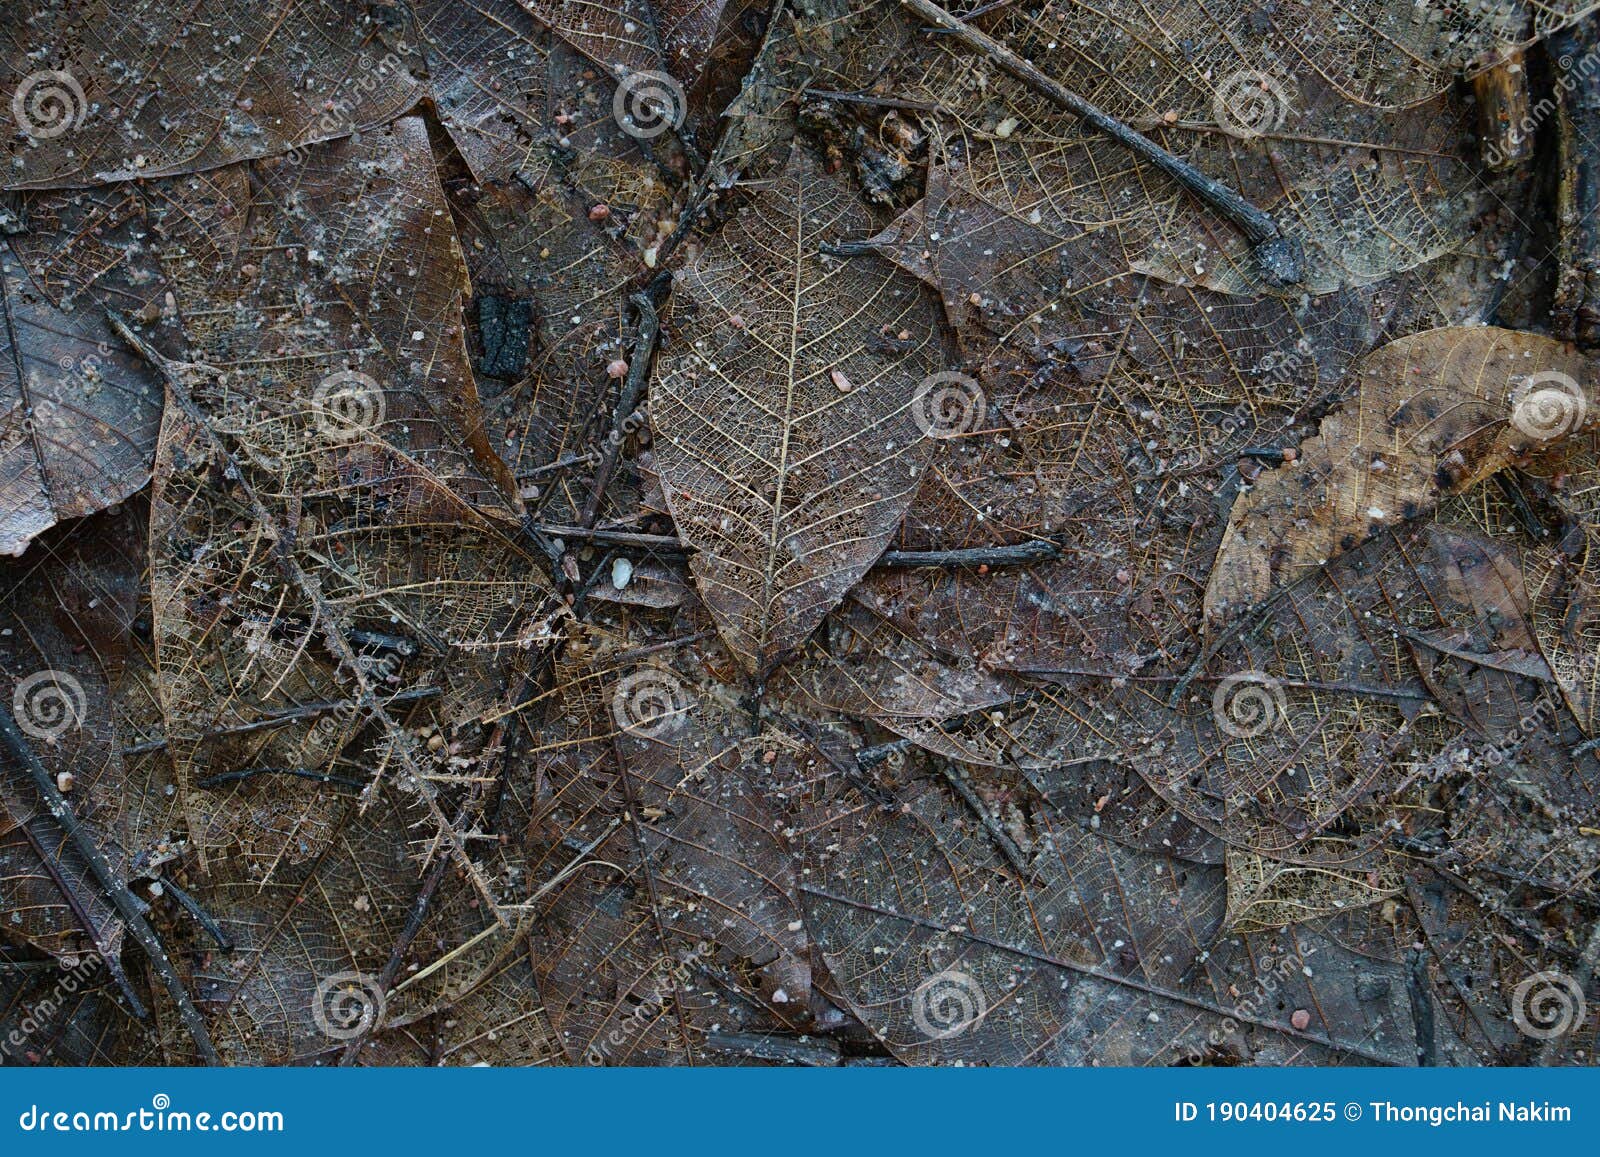 Wet Rotting Leaves that Accumulate of Rubber Trees. Stock Image - Image ...